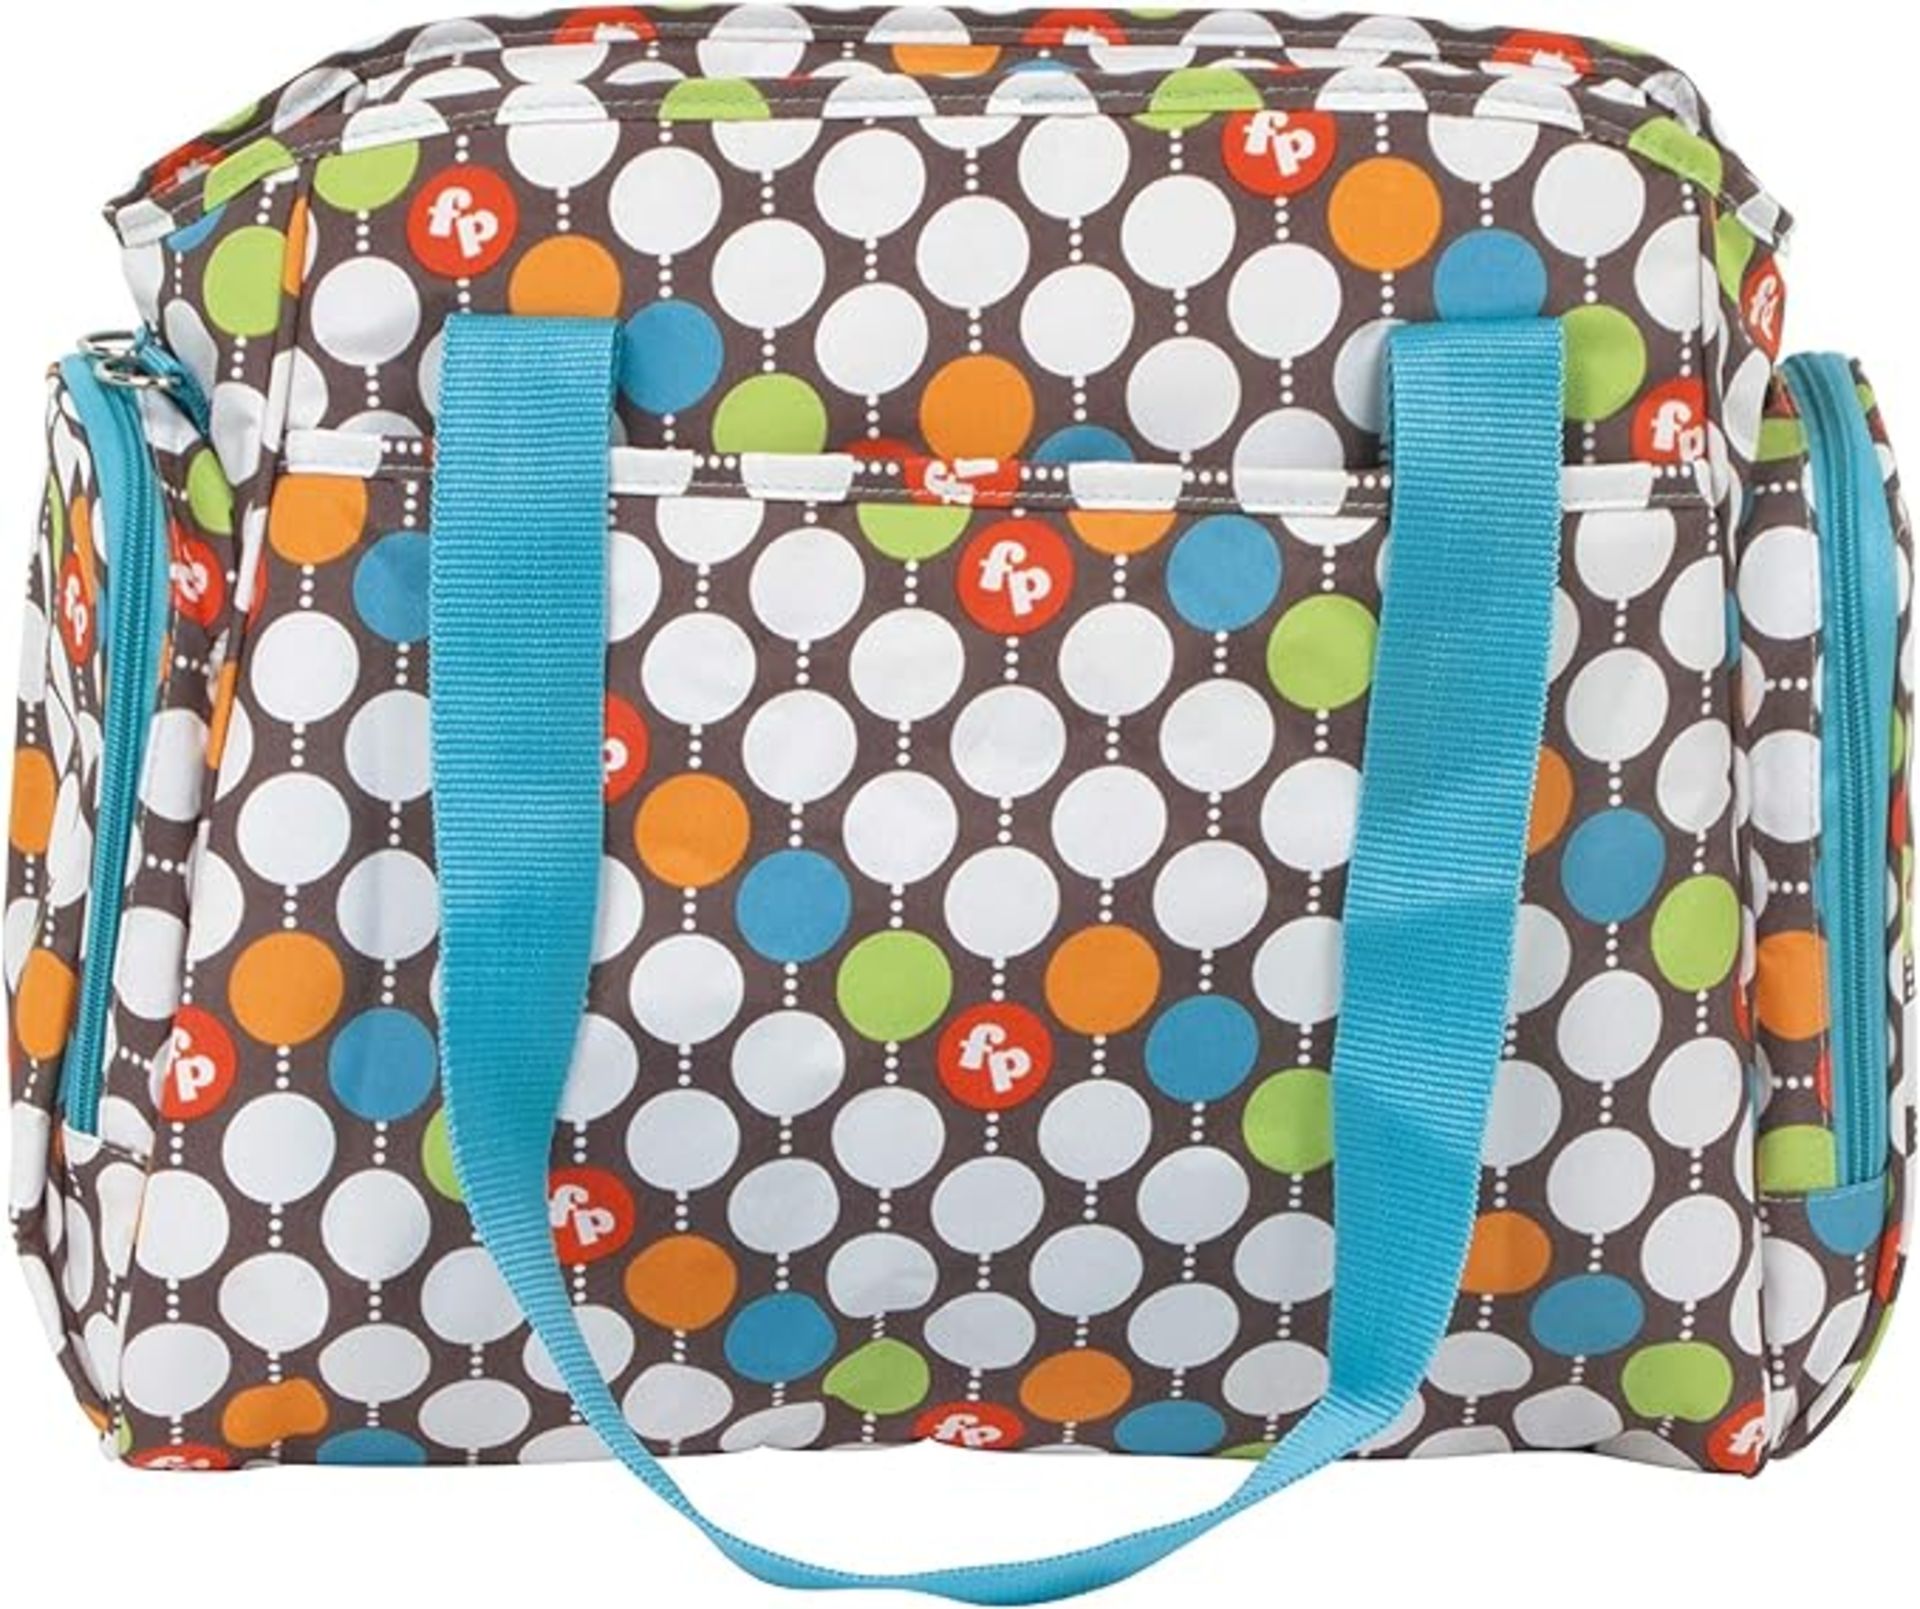 10 X NEW FISHER PRICE BABY BAG+ACC 37X17X32.5 DOTS - Image 3 of 6